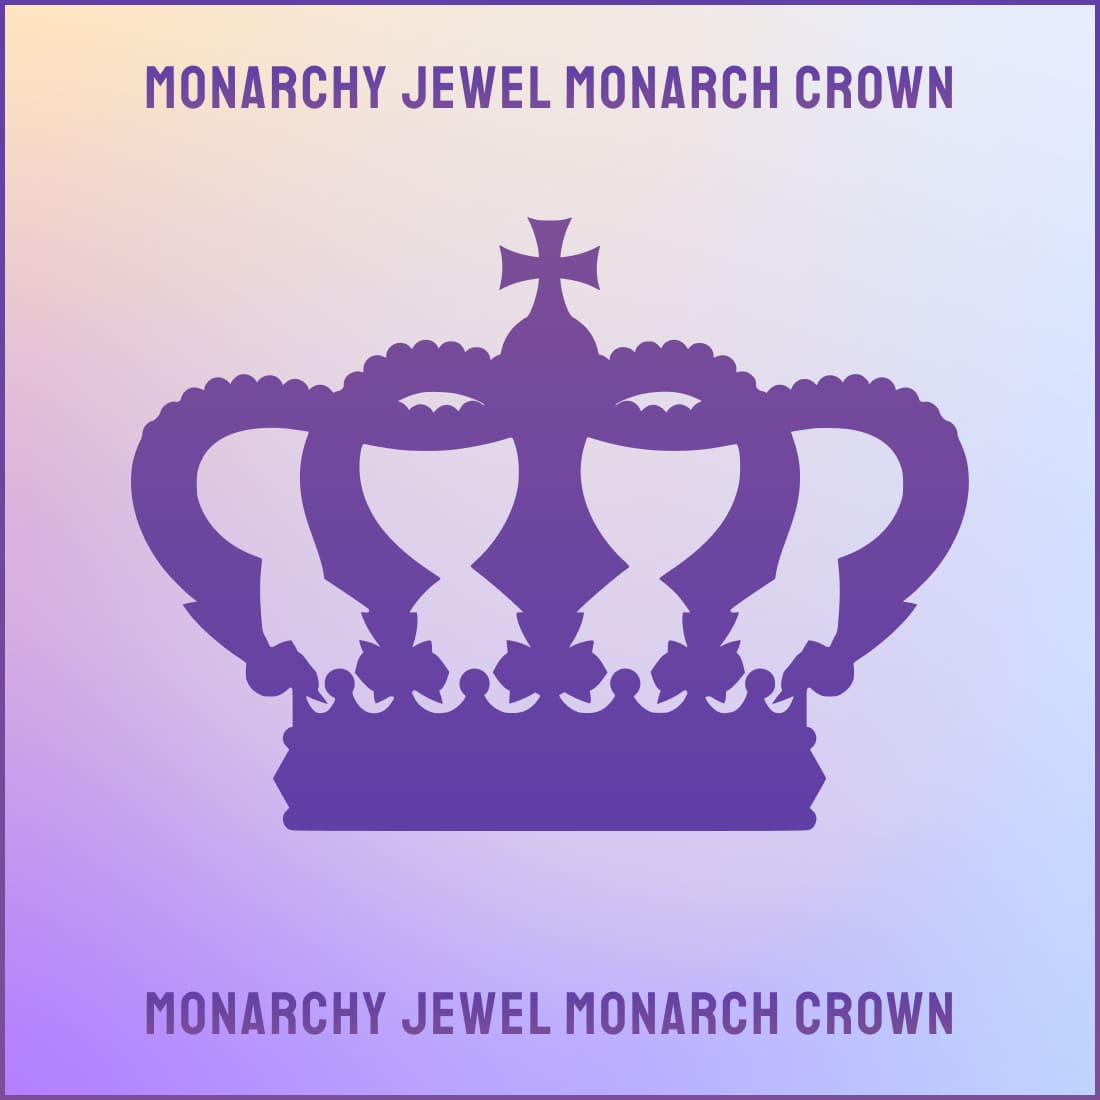 Monarchy Jewel Monarch Crown main cover.